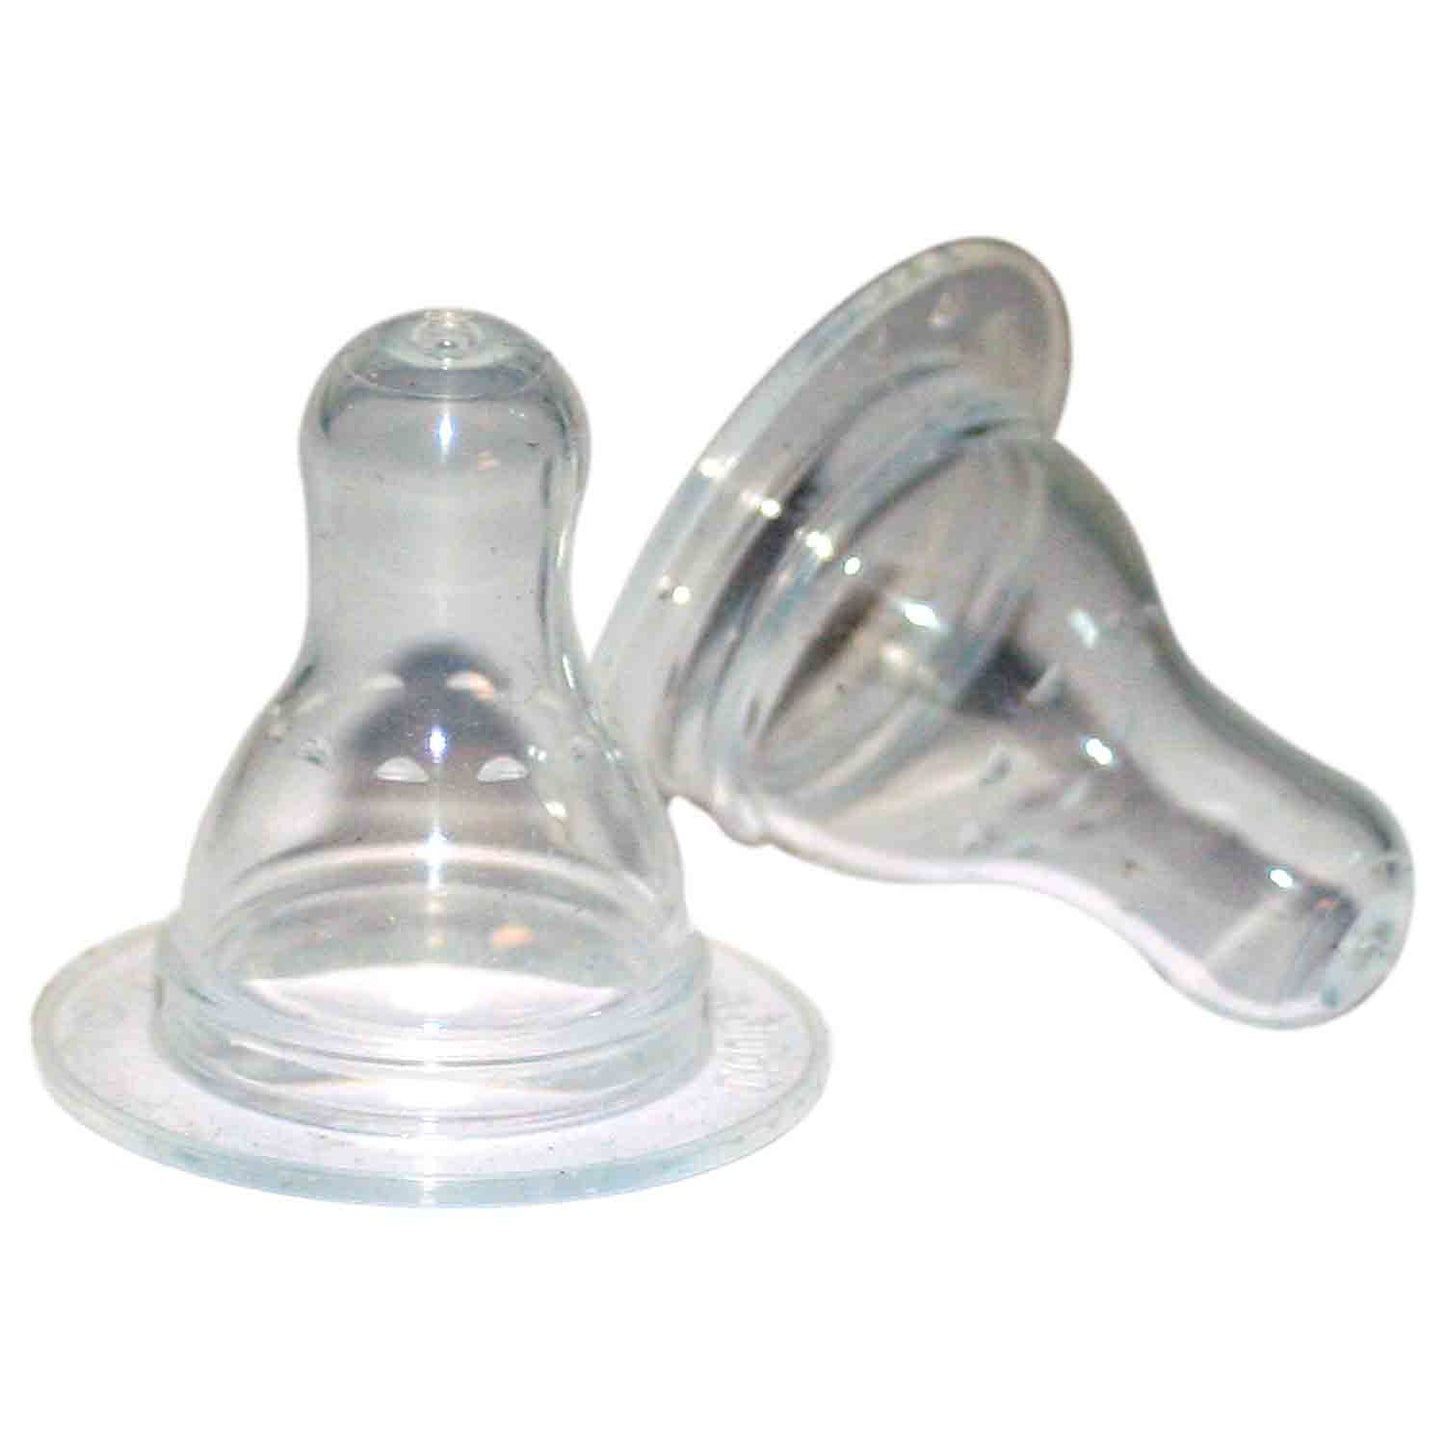 Silicon Teats (XL)~2 Pack